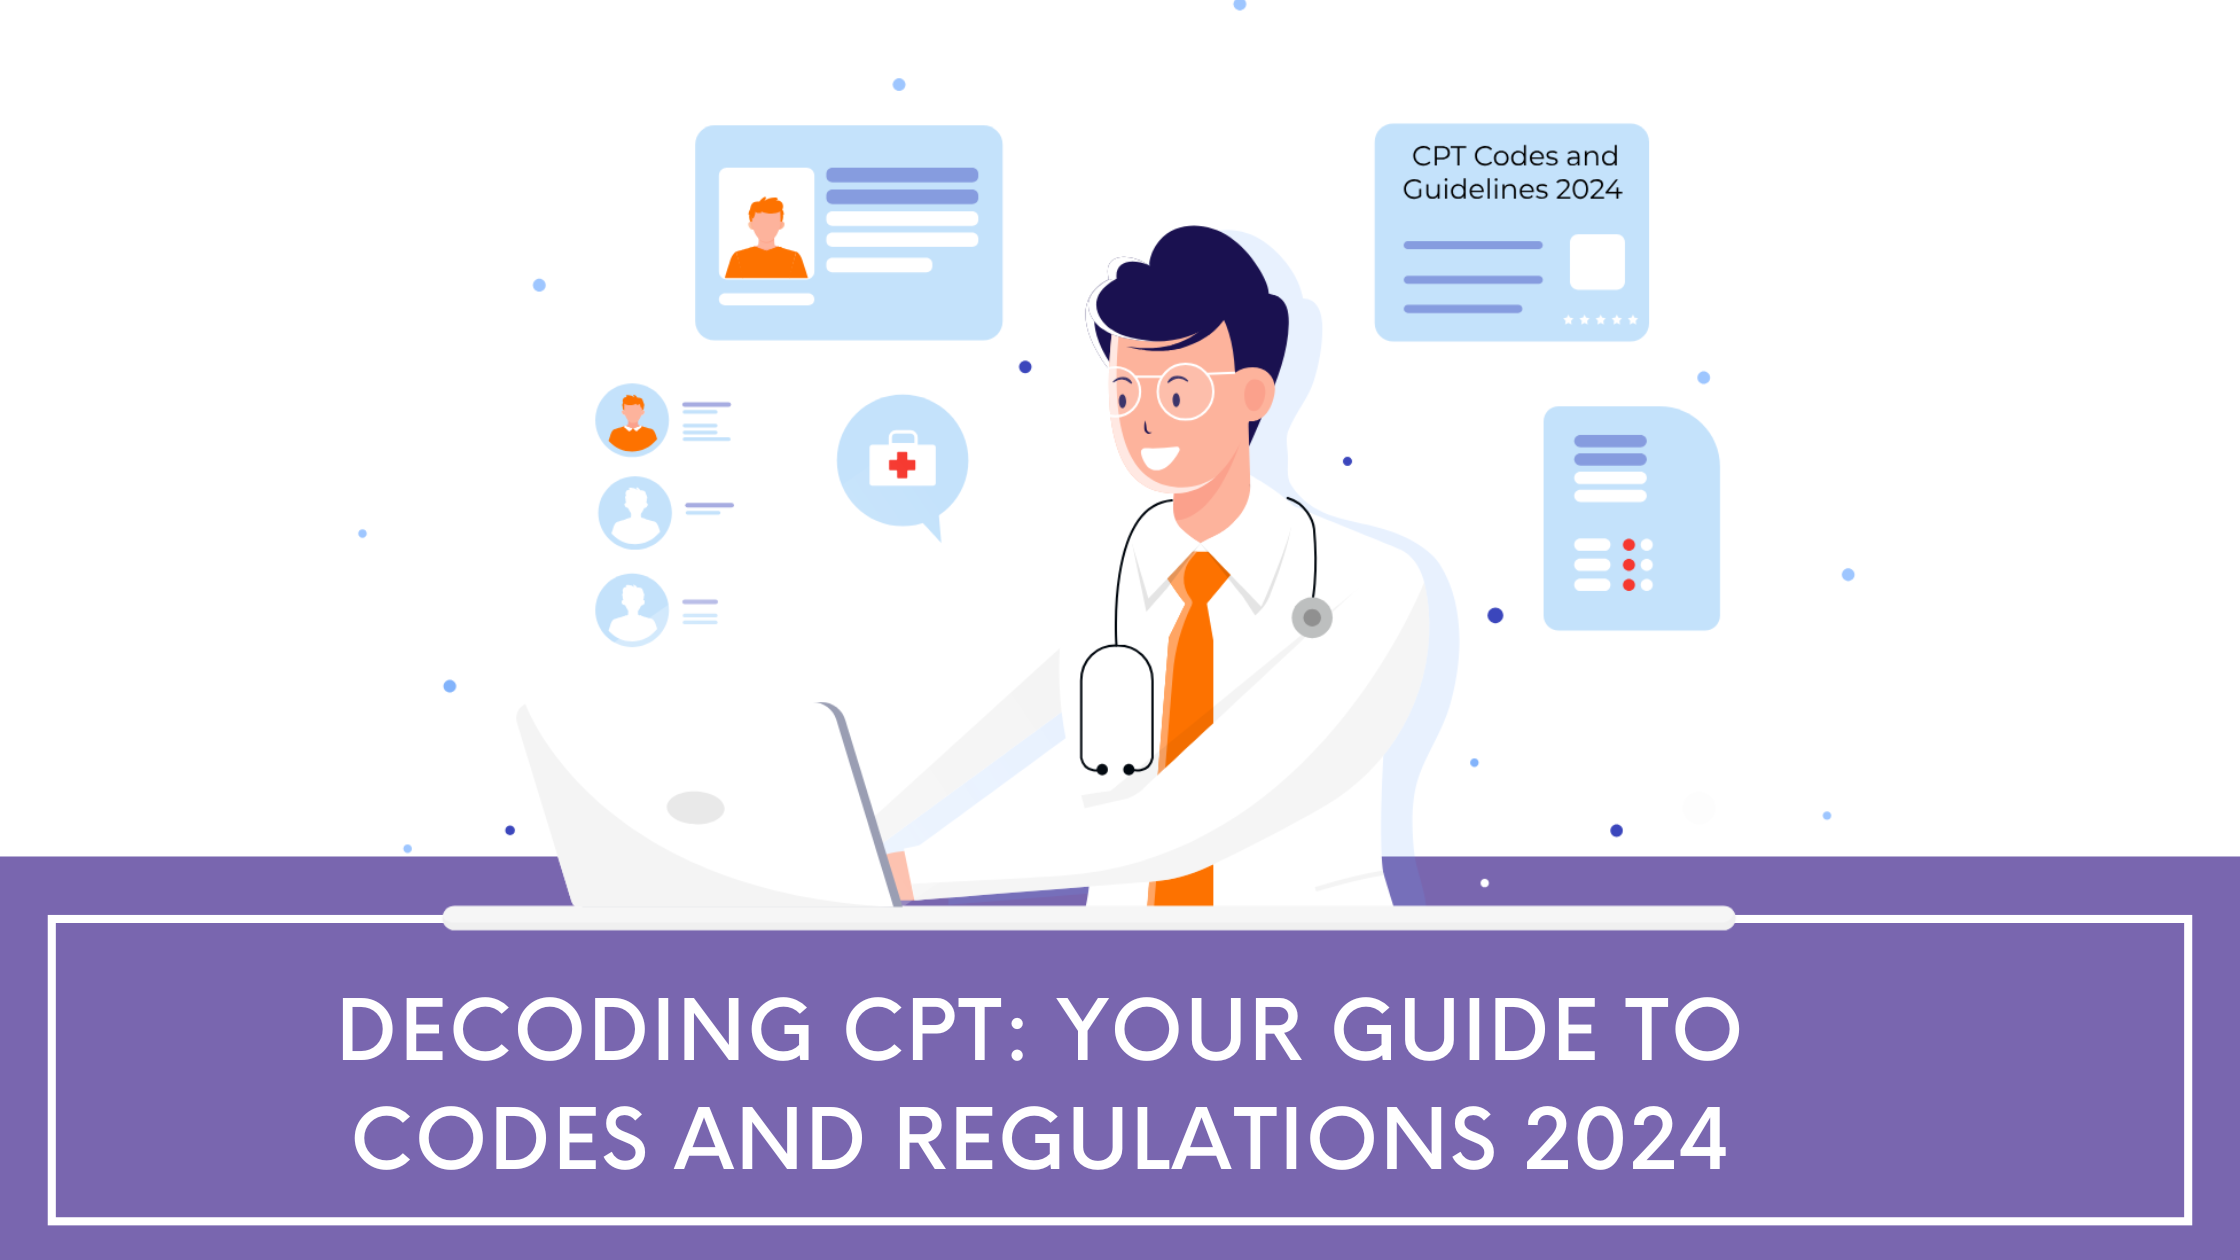 updated CPT codes and guidelines 2024